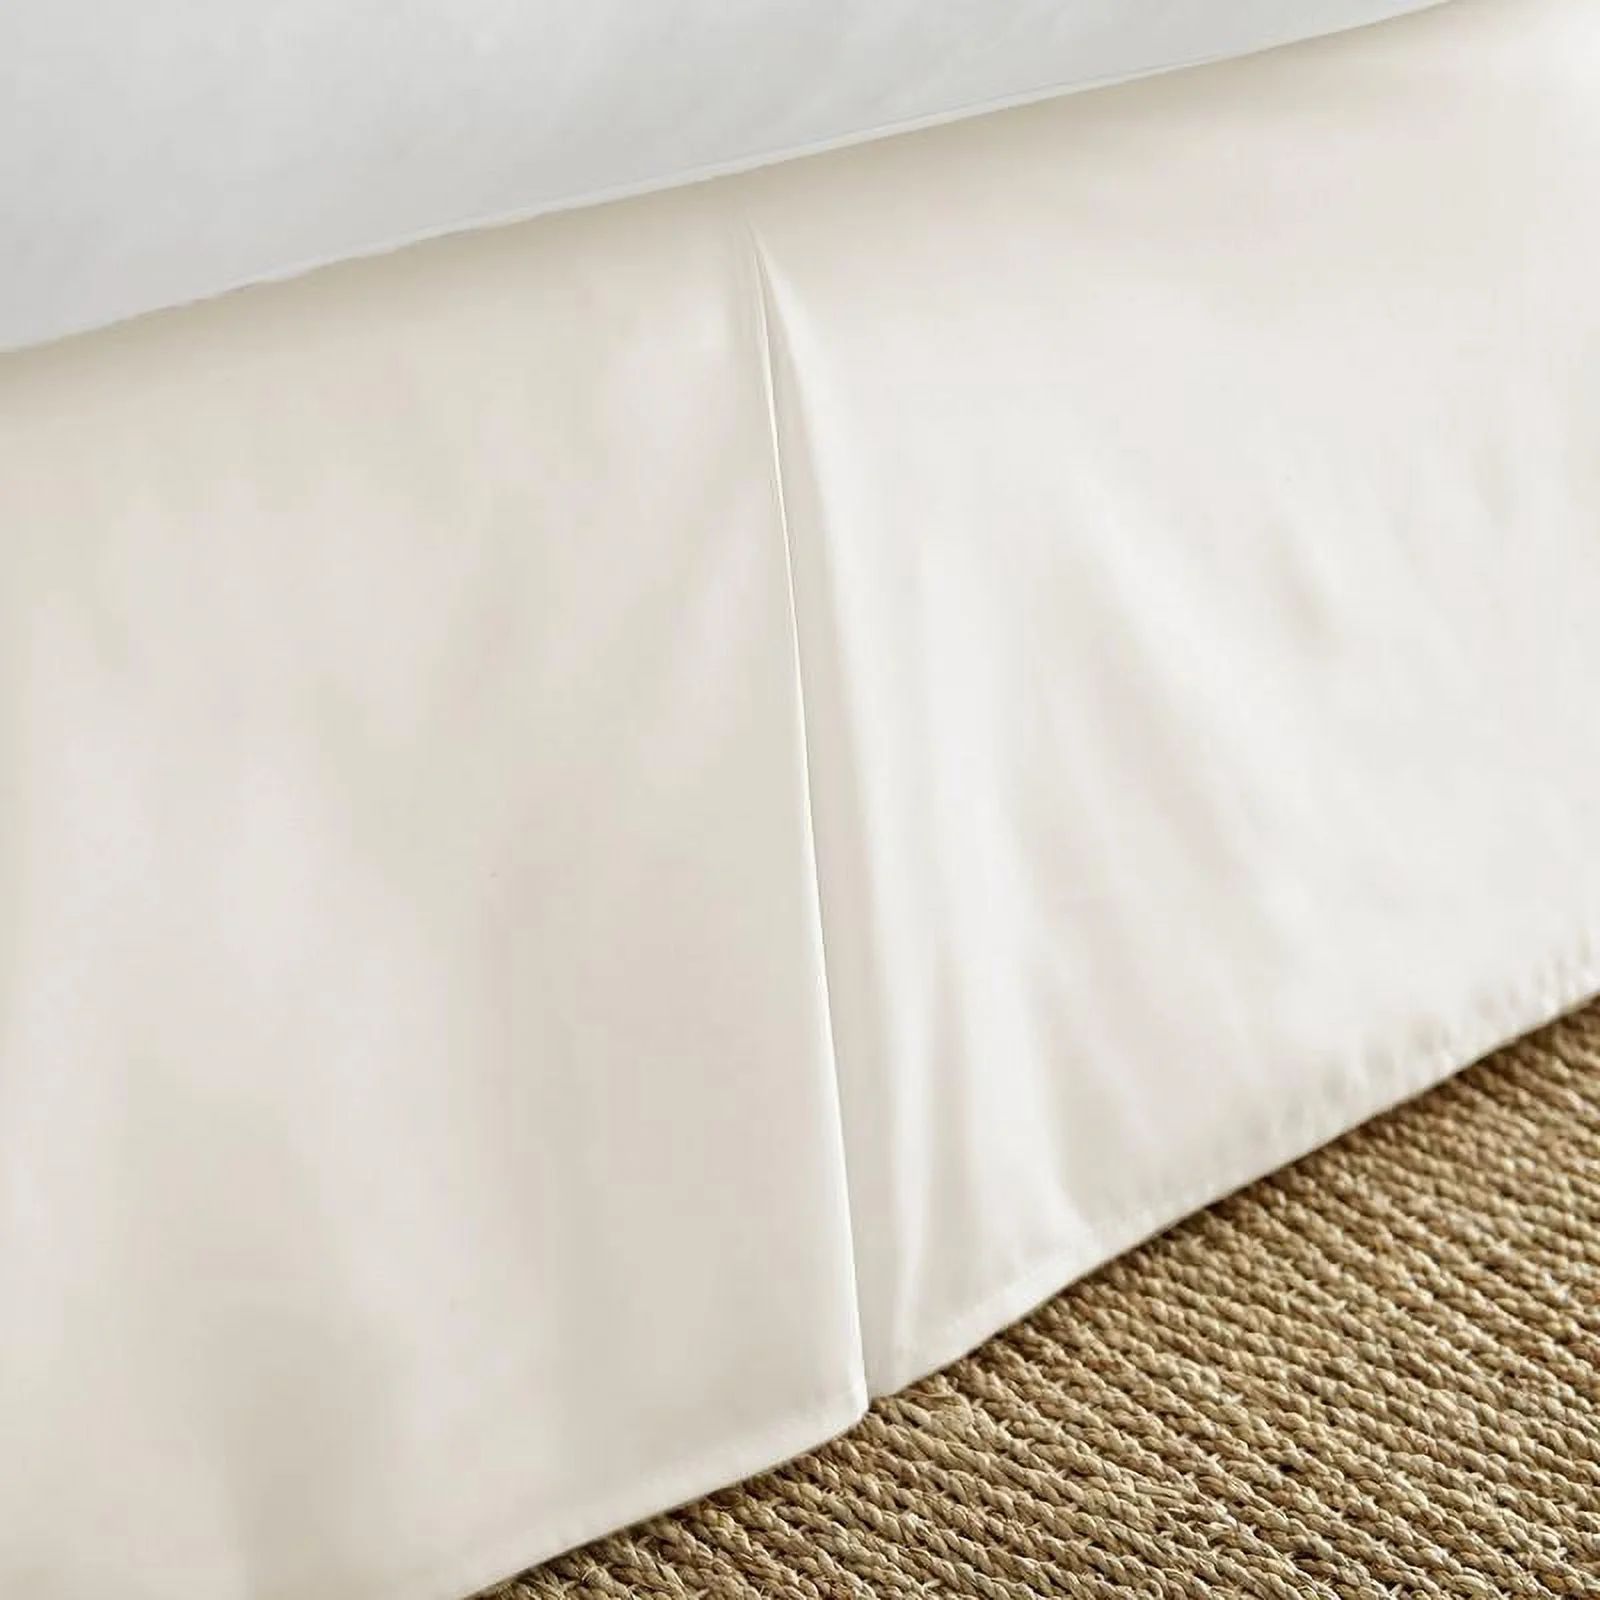 Off-White Pleated Dust Ruffle Bed Skirt, Queen, by Noble Linens | Walmart (US)